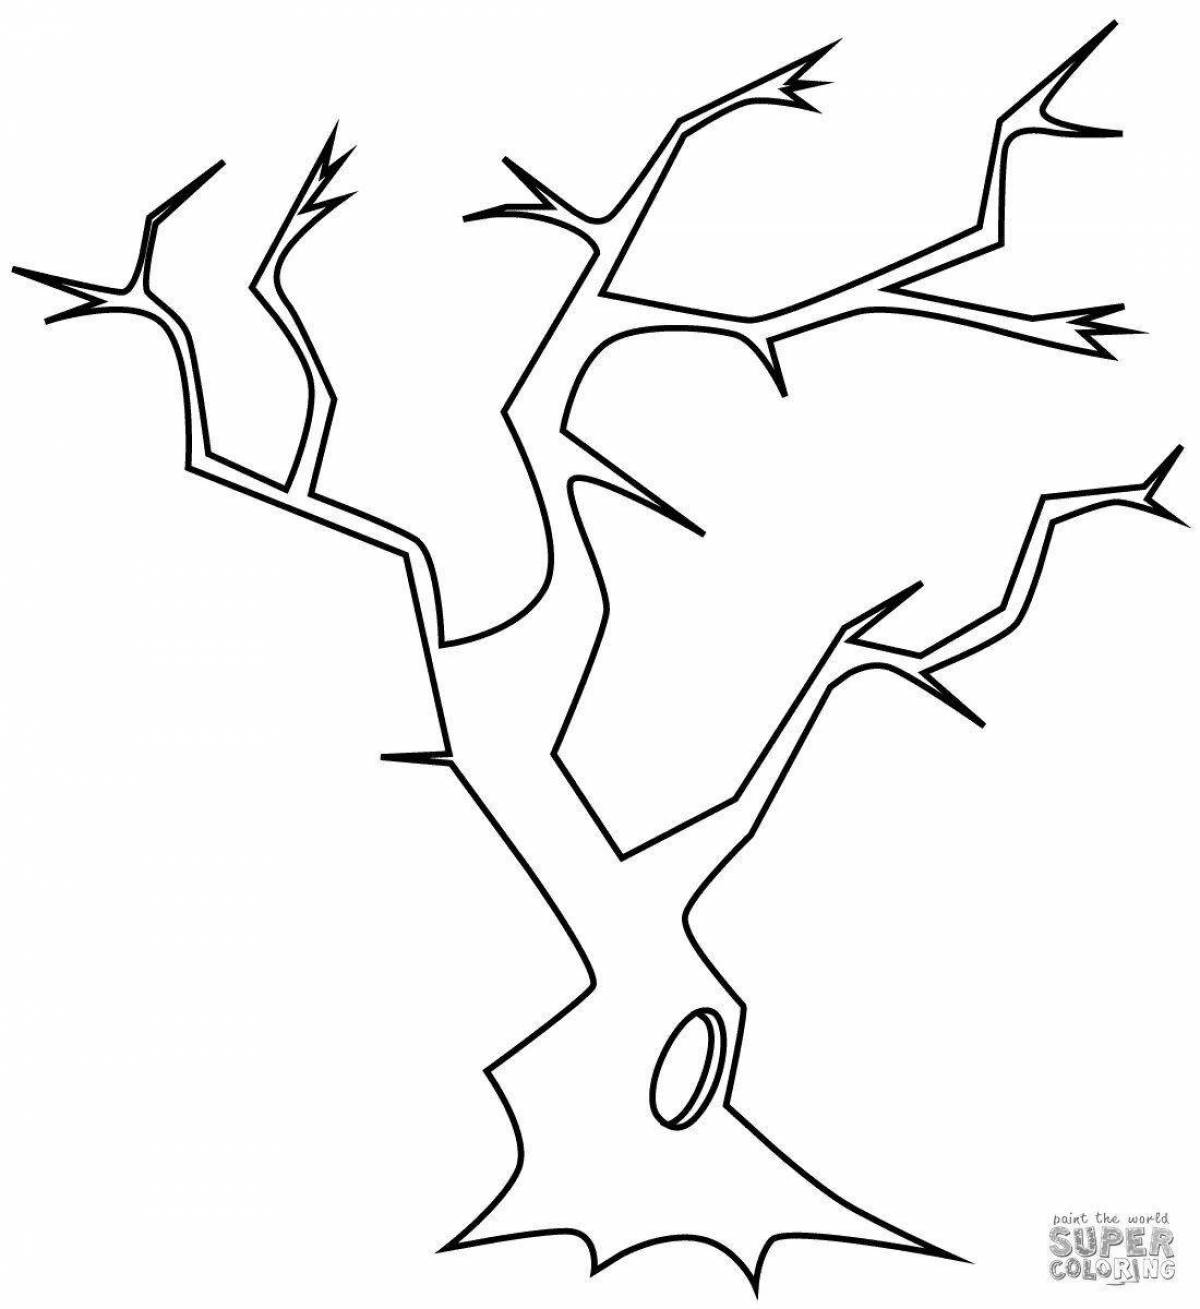 Glitter coloring tree without leaves outline